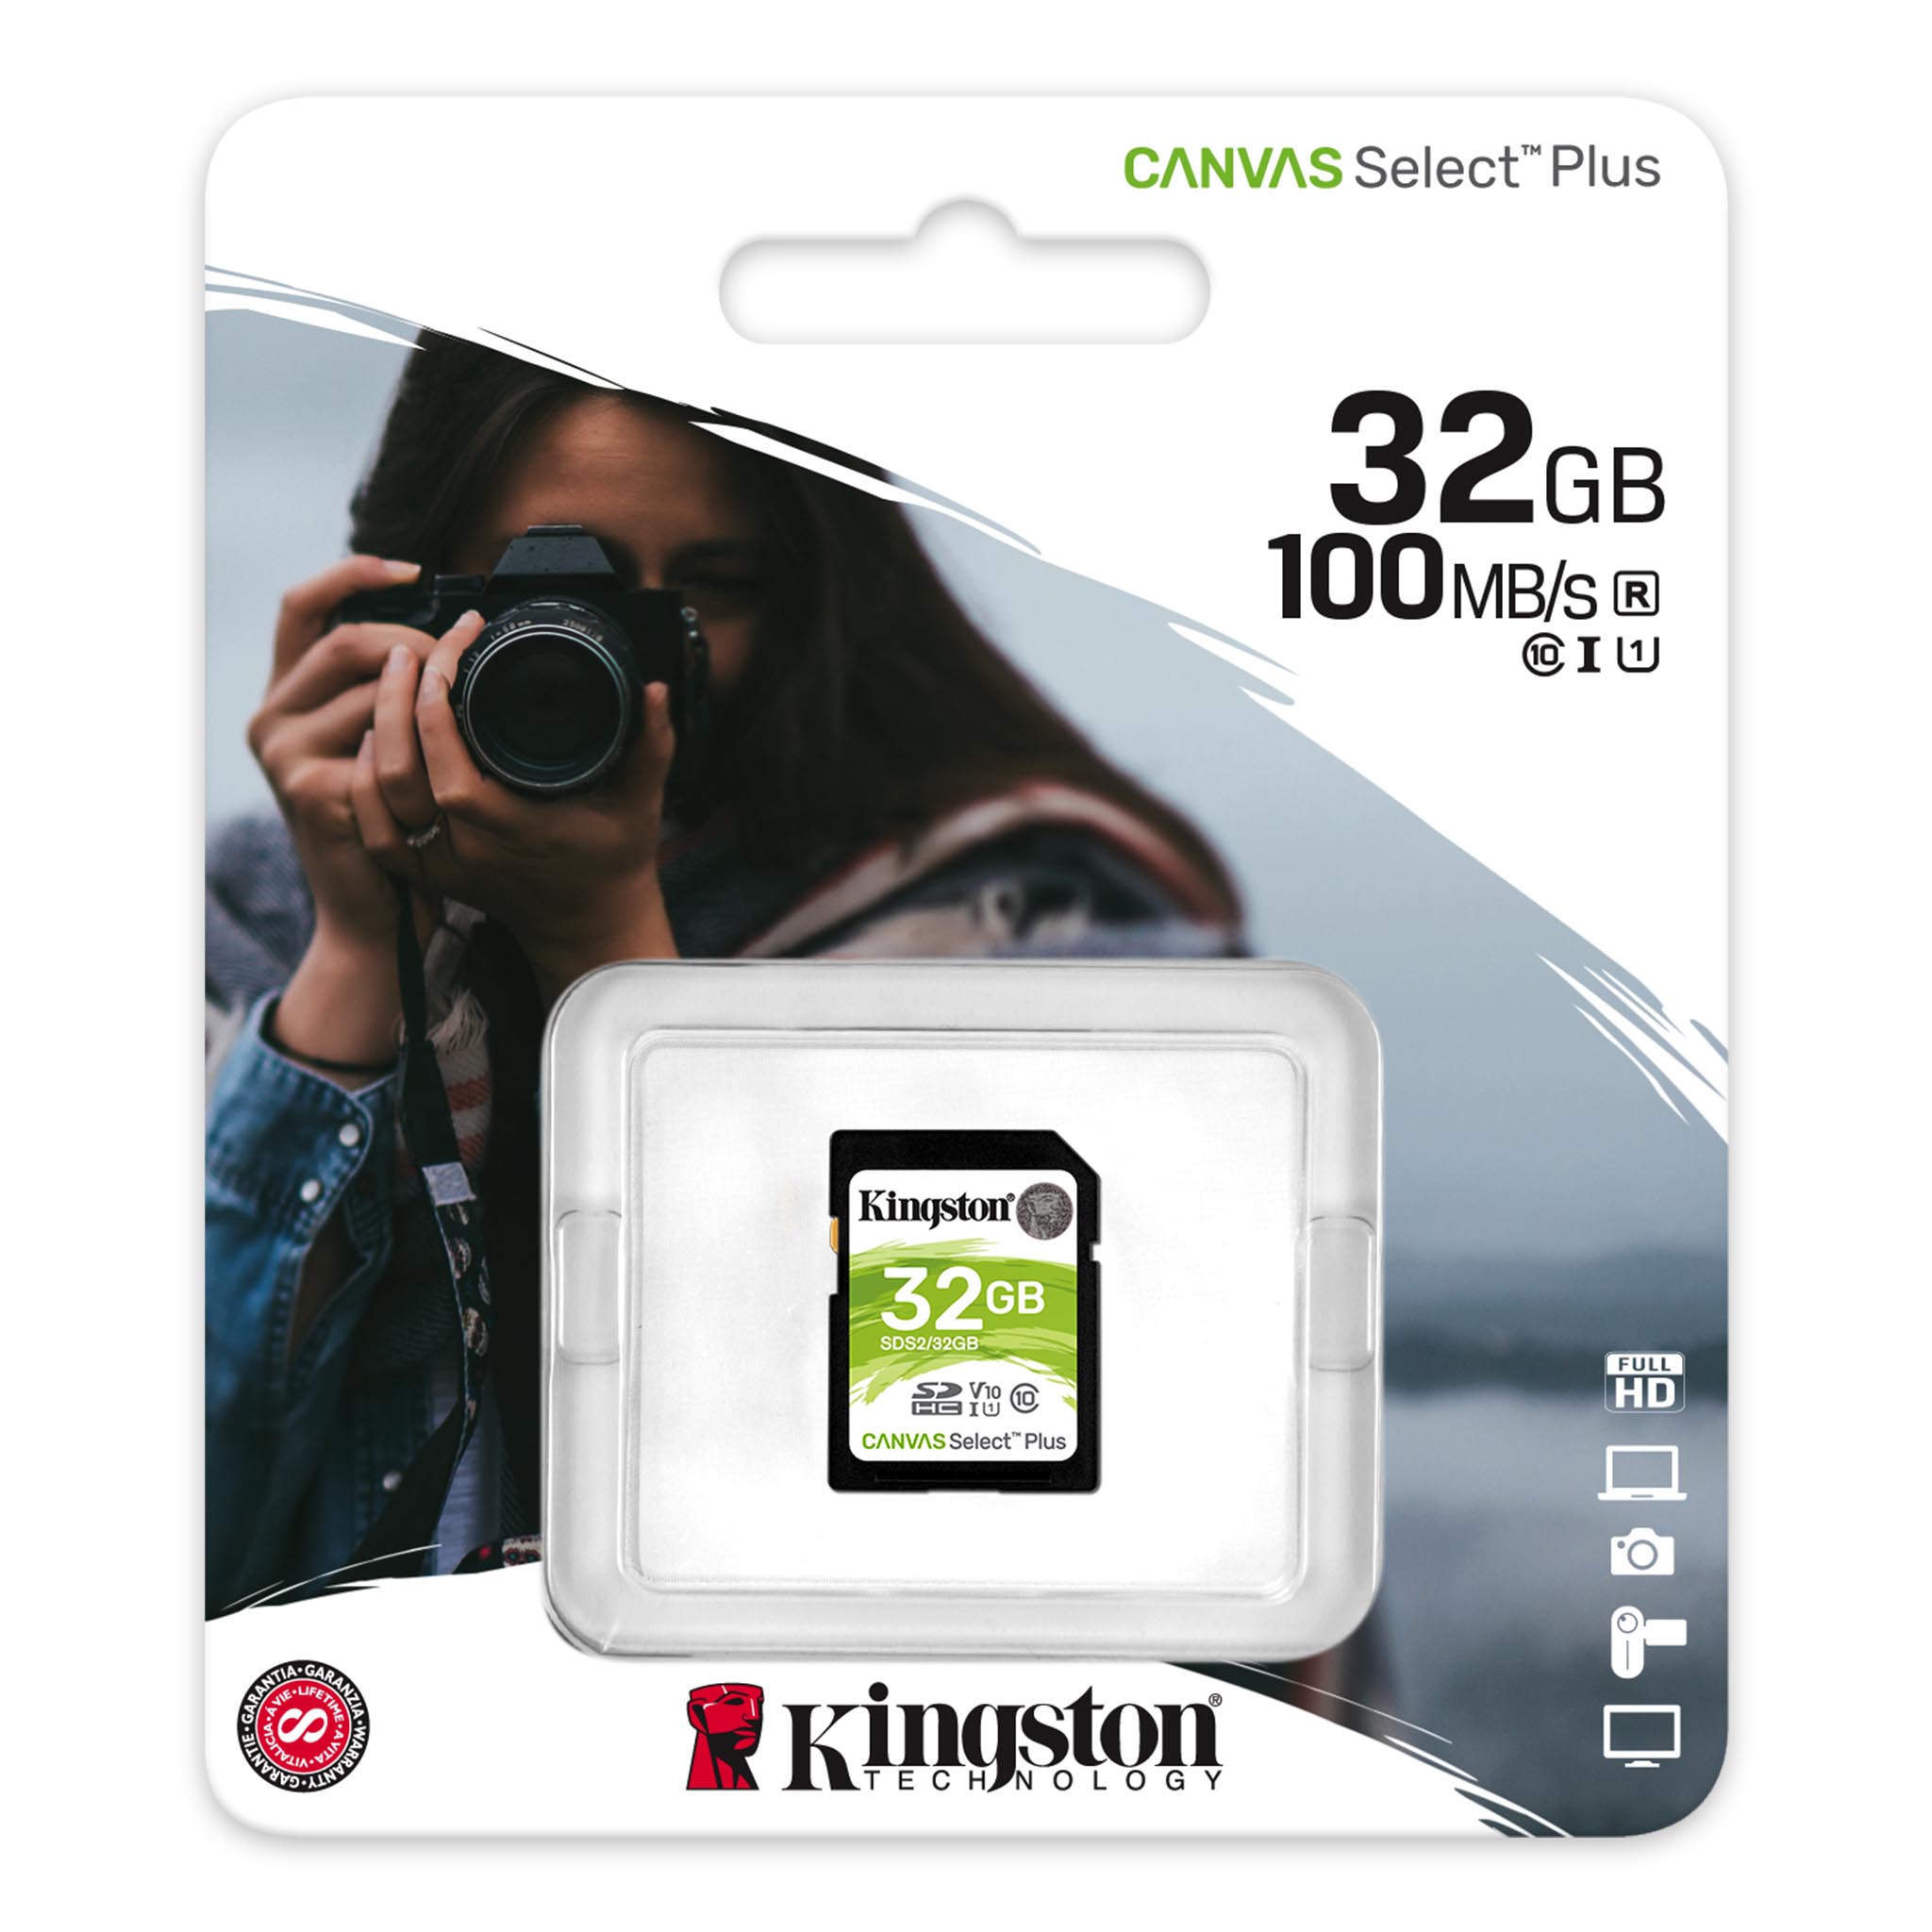 100MBs Works with Kingston Kingston 32GB Xiaomi M2003J15SS MicroSDHC Canvas Select Plus Card Verified by SanFlash. 